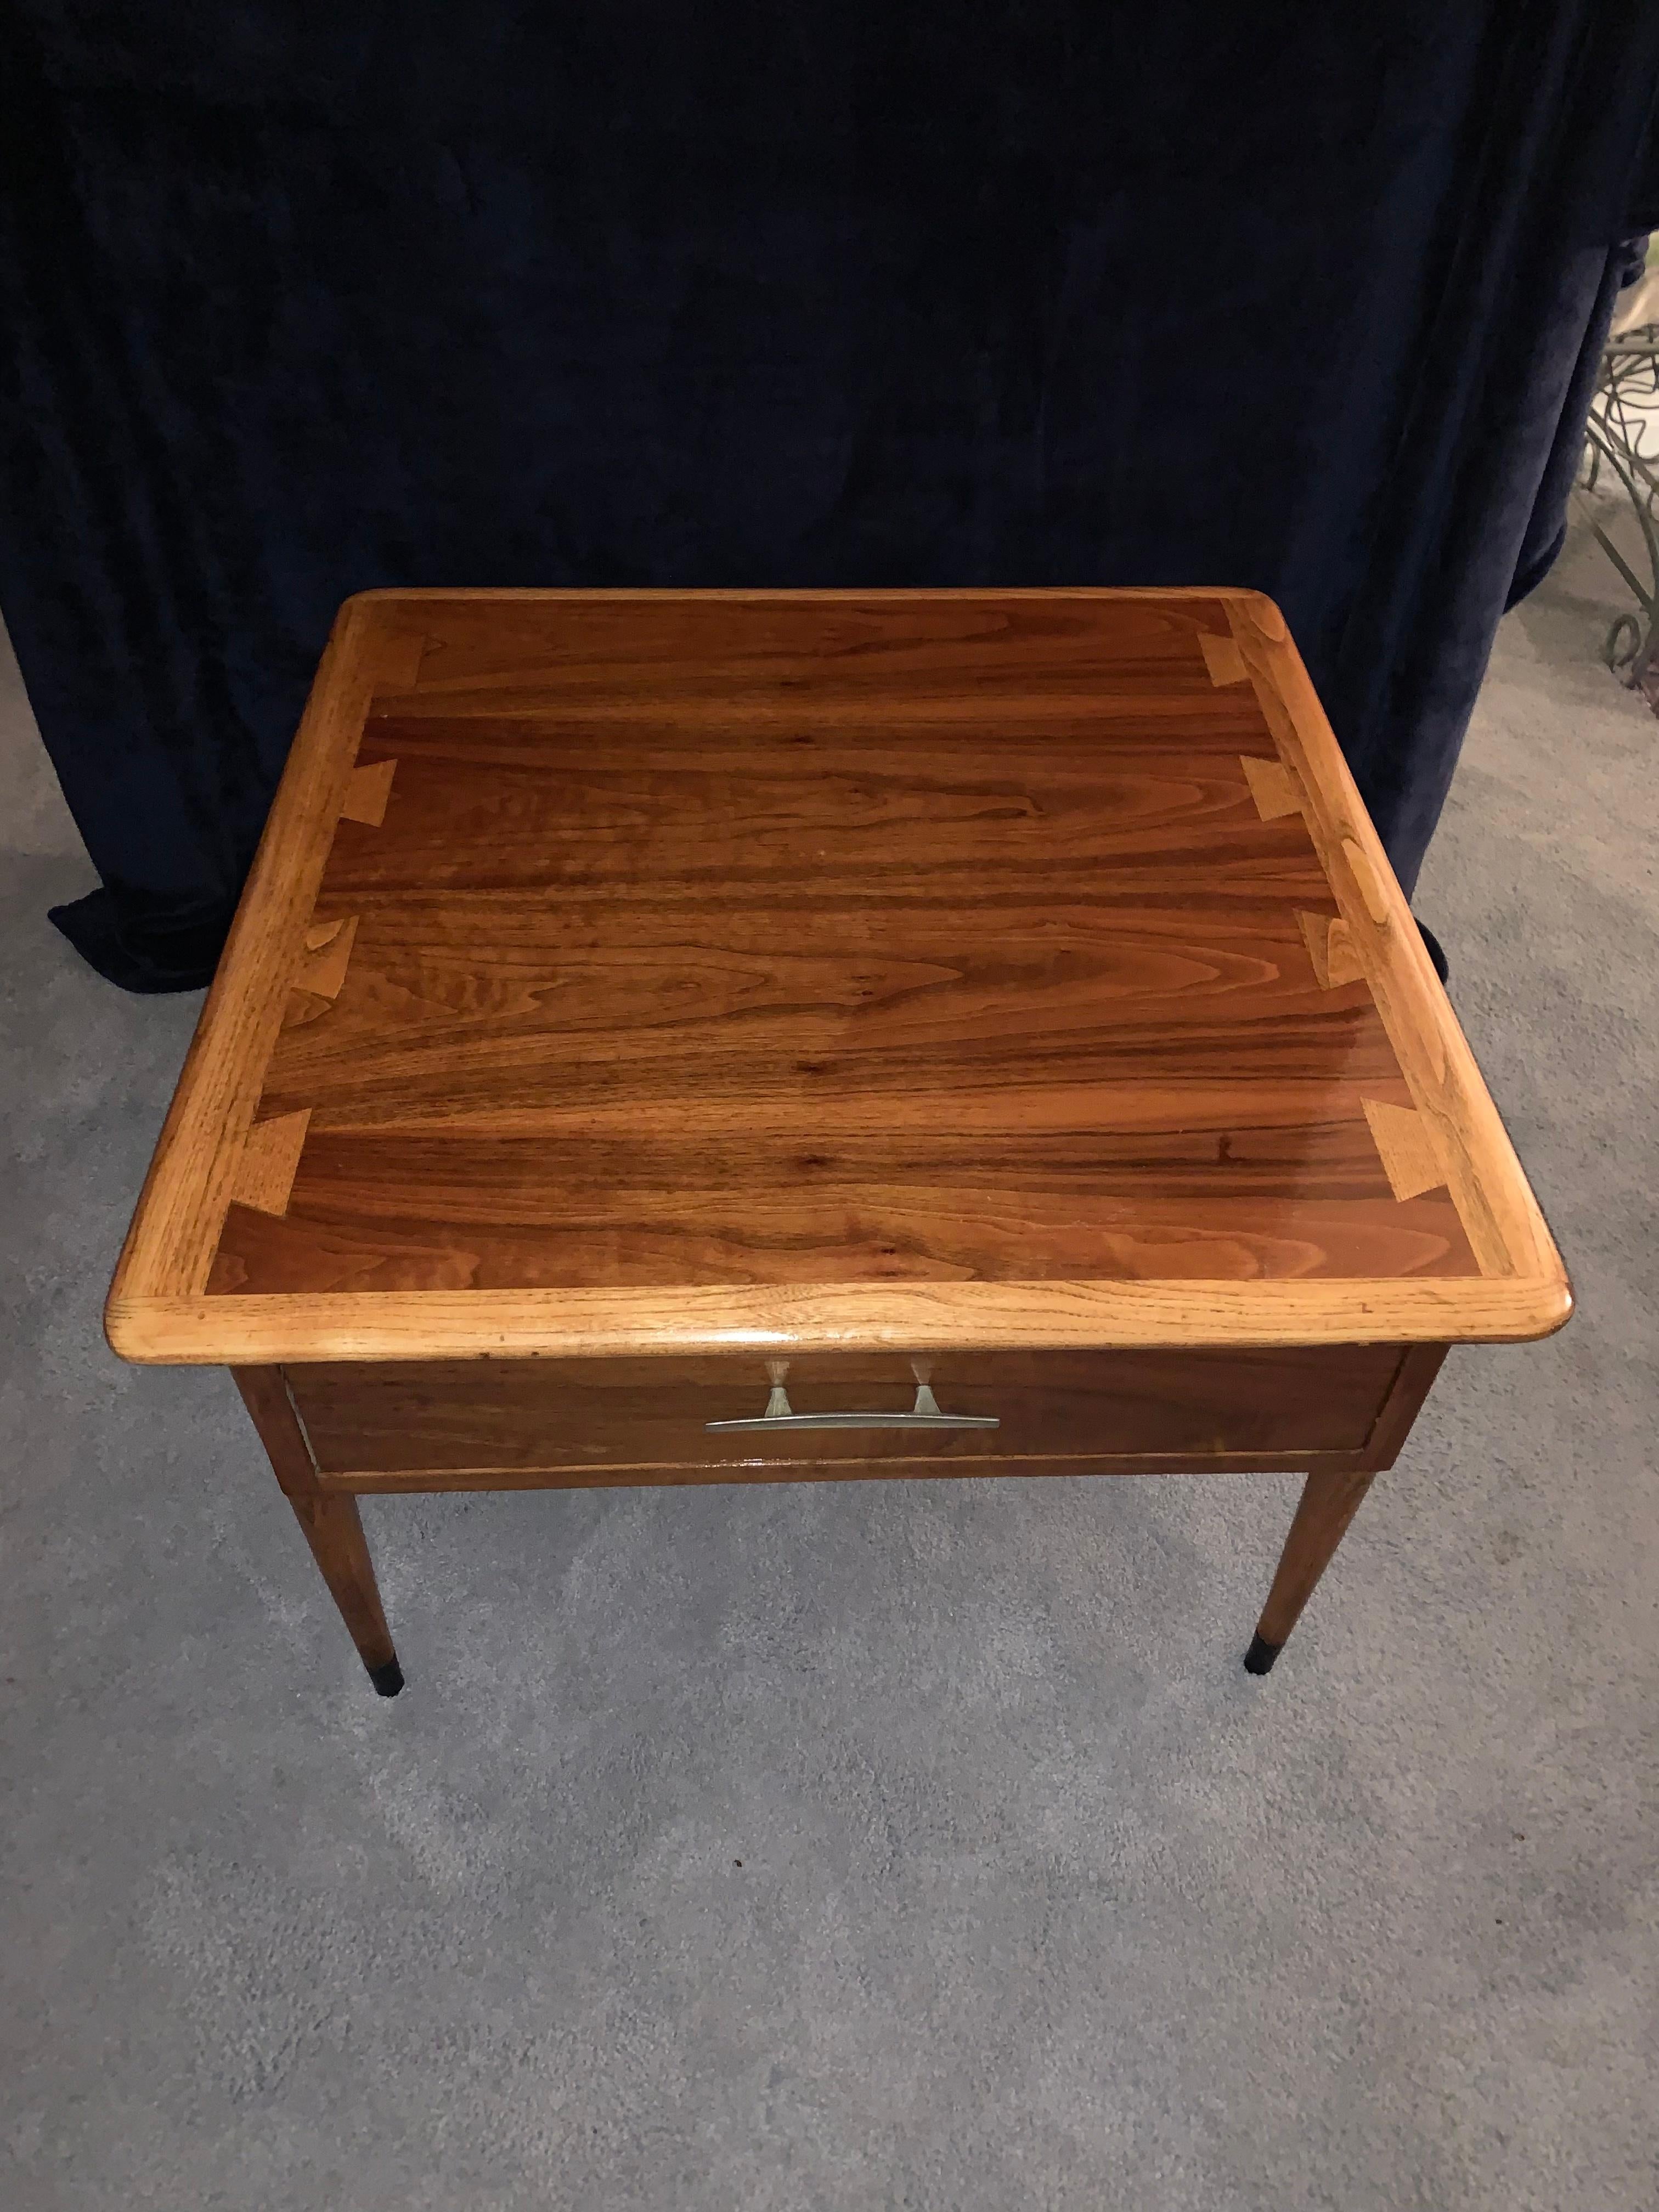 Mid-Century walnut commode table by Lane, Acclaim. Walnut side table with drawer by Lane Furniture, part of the Acclaim line designed by Andre Bus showcasing his iconic two-tone wood dovetail, using walnut and fruit woods. Beautiful square top wood